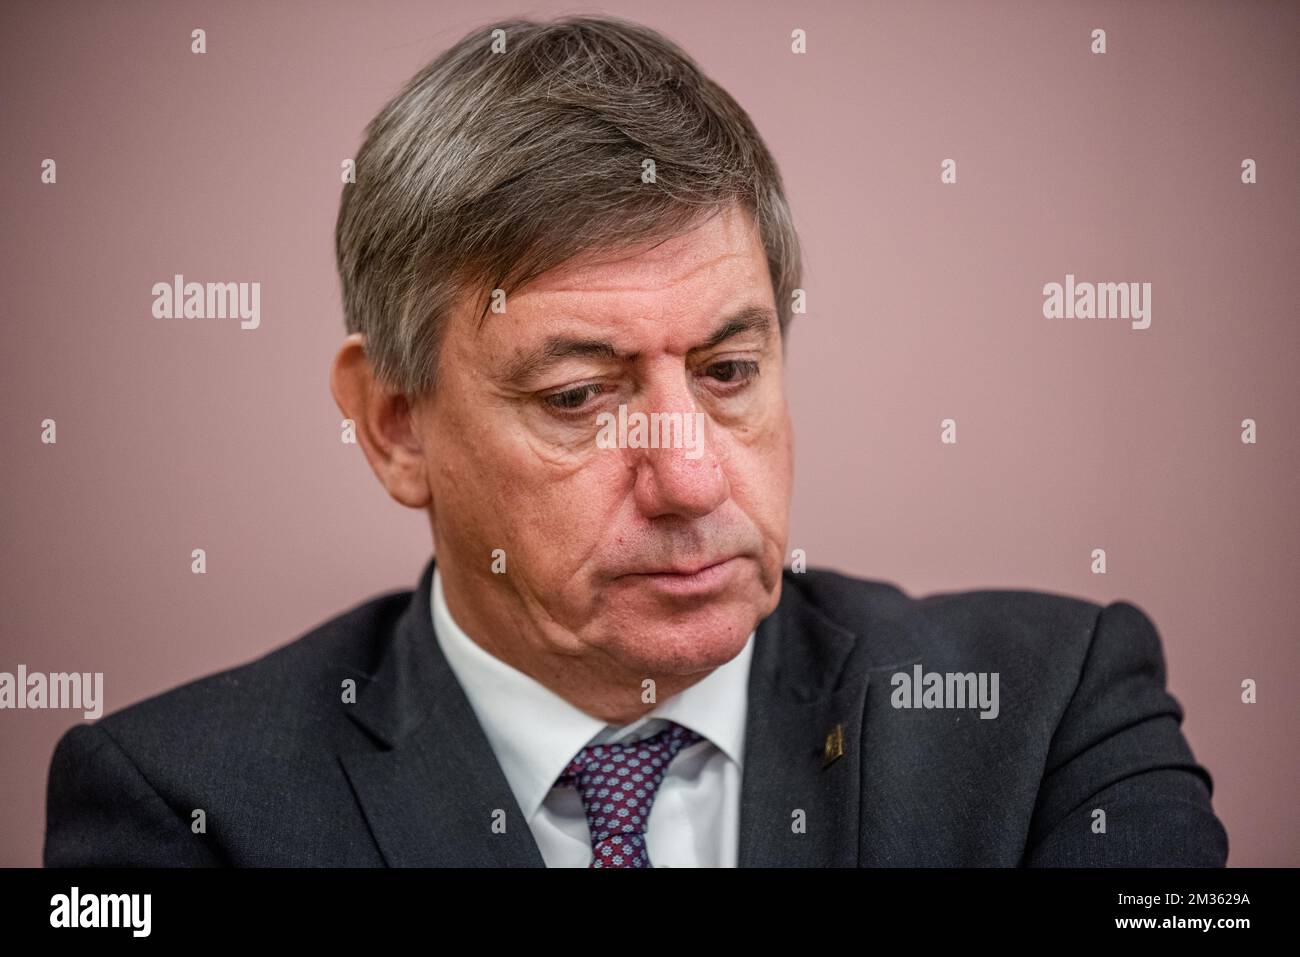 Flemish Minister President Jan Jambon pictured at a press conference at  Kunsthalle München in Munich, Germany on Thursday 14 October 2021. The  Flemish Government acquired the painting 'Ontwikkeling van een thema in